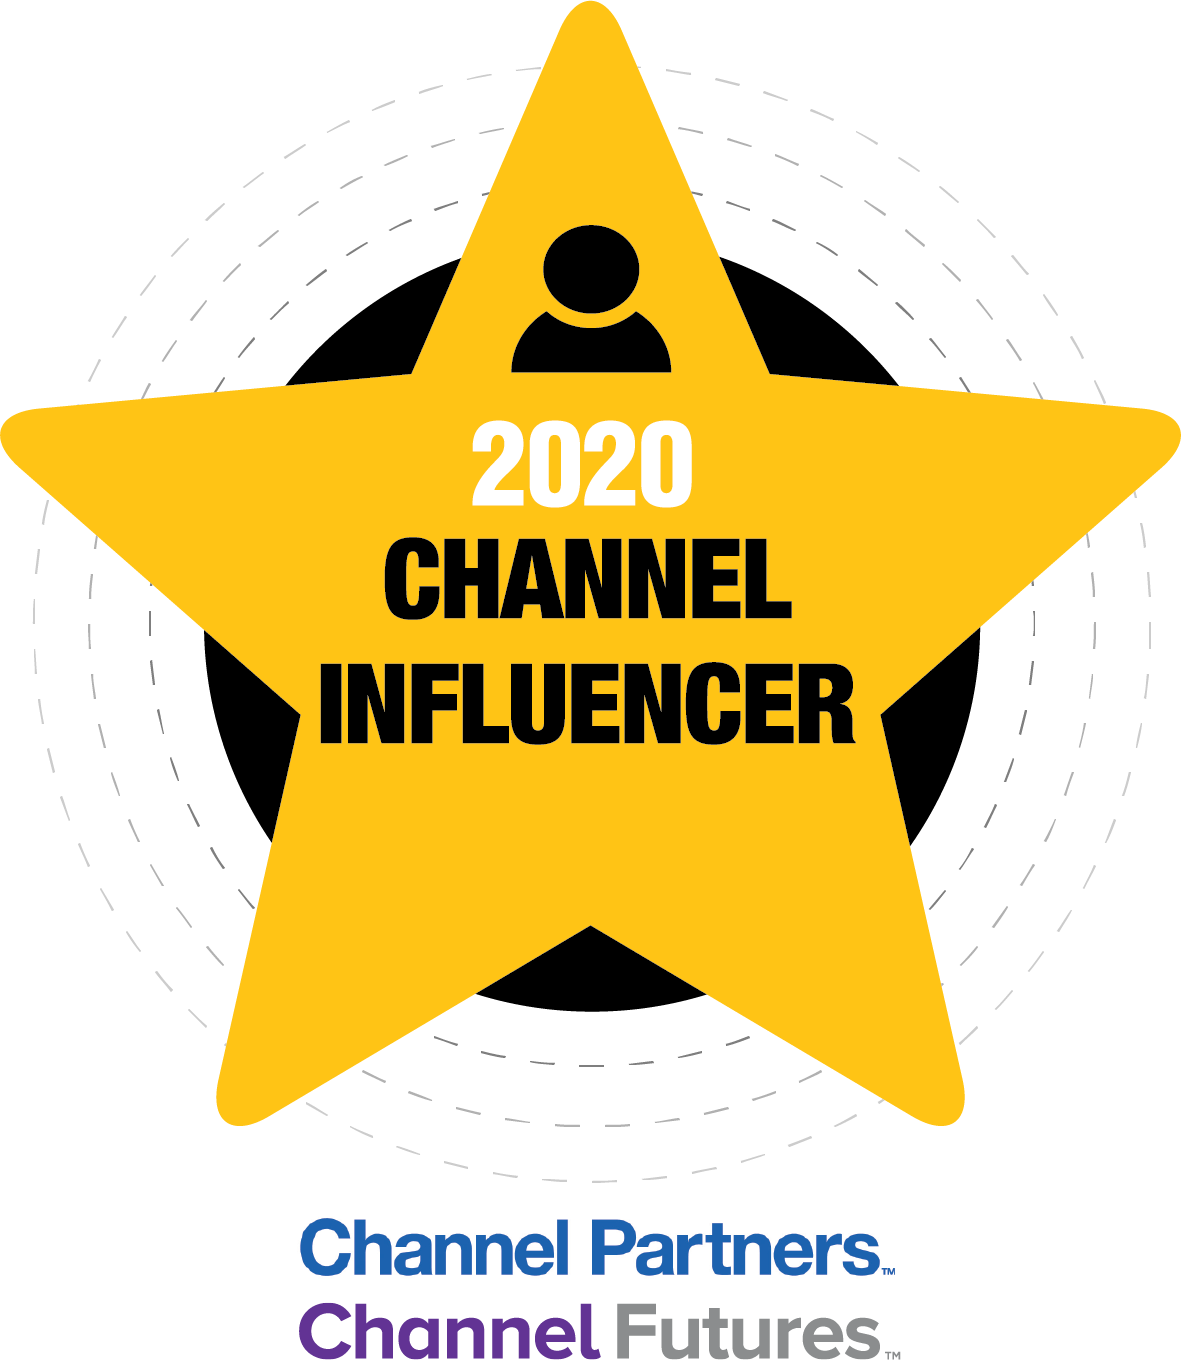 Kevin Rooney Named 2020 Channel Influencer by Channel Partners, Channel Futures 